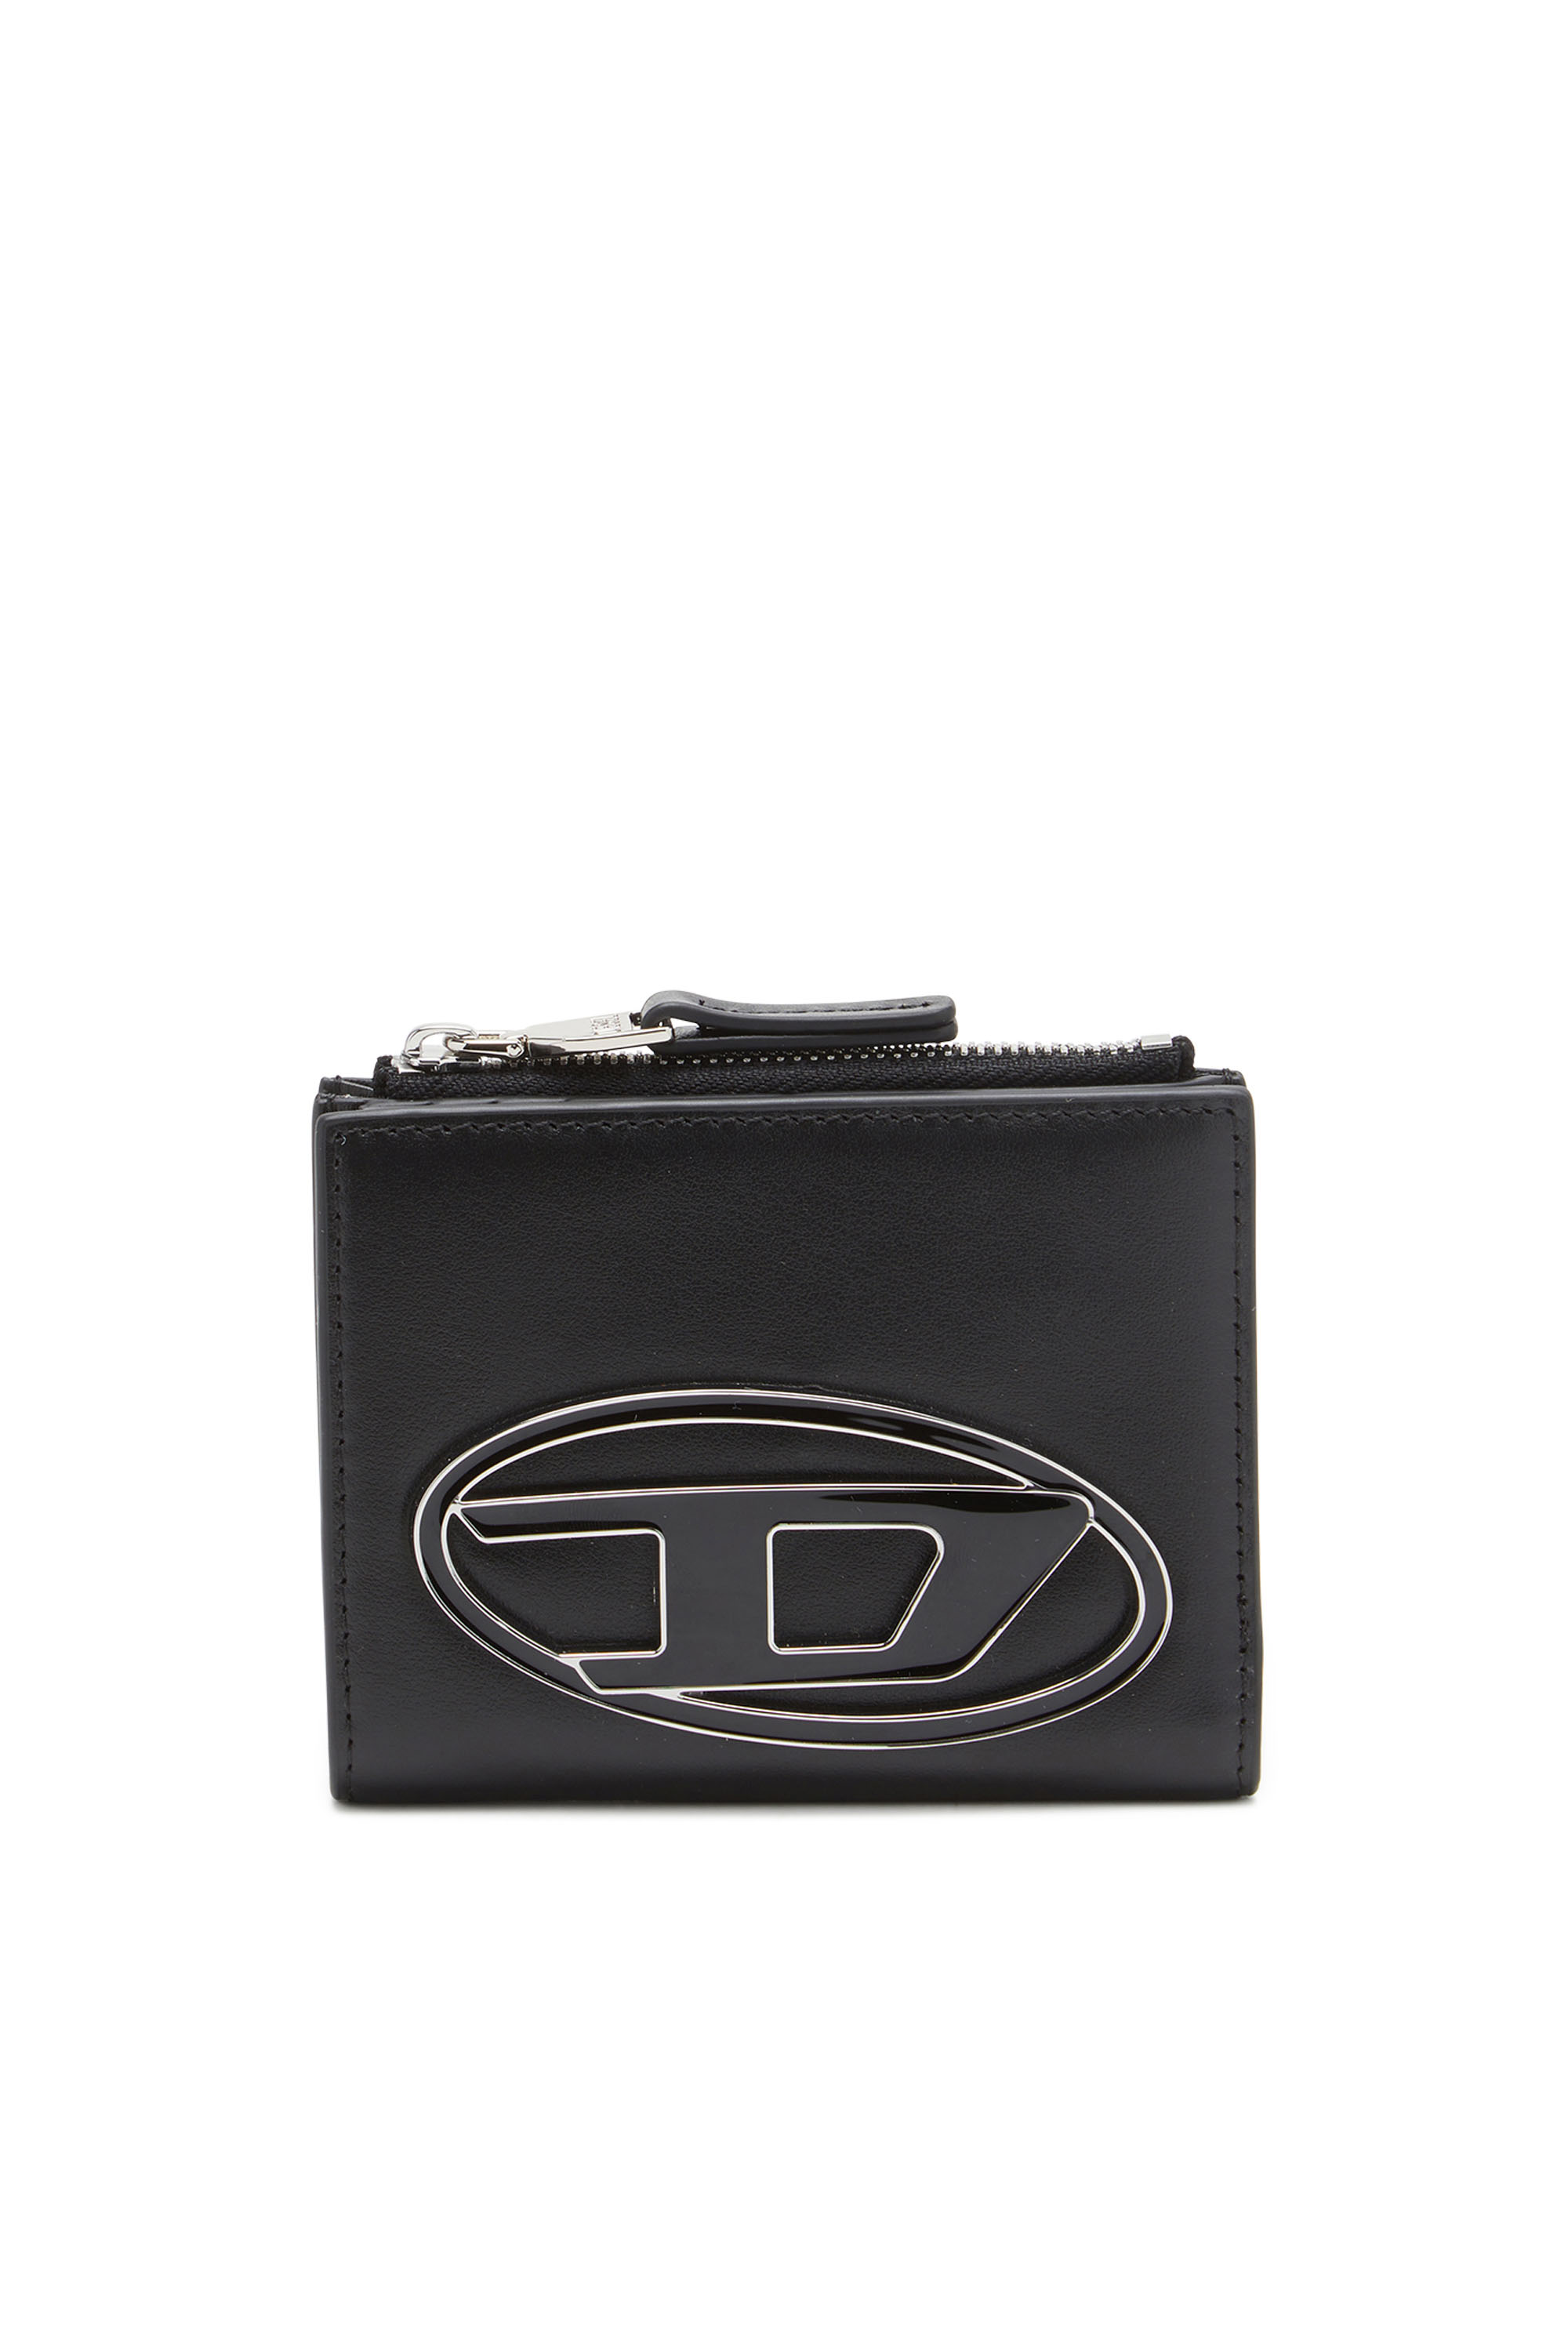 Diesel - Small leather wallet with logo plaque - Small Wallets - Woman - Black